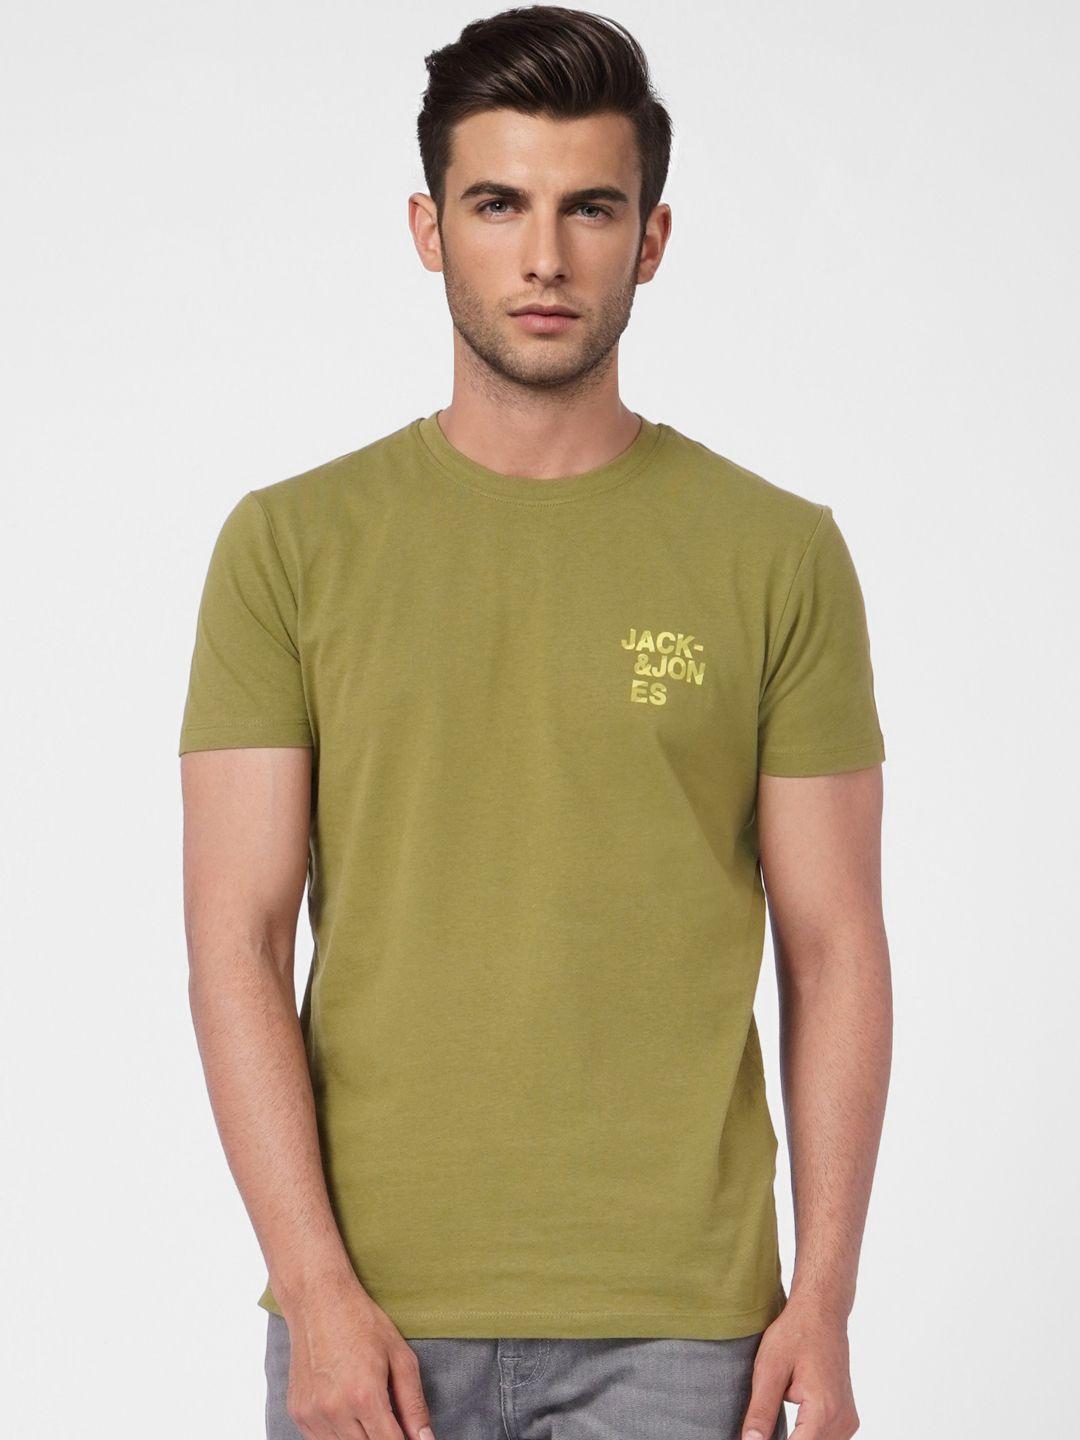 jack & jones men olive green typography printed slim fit pure cotton casual t-shirt